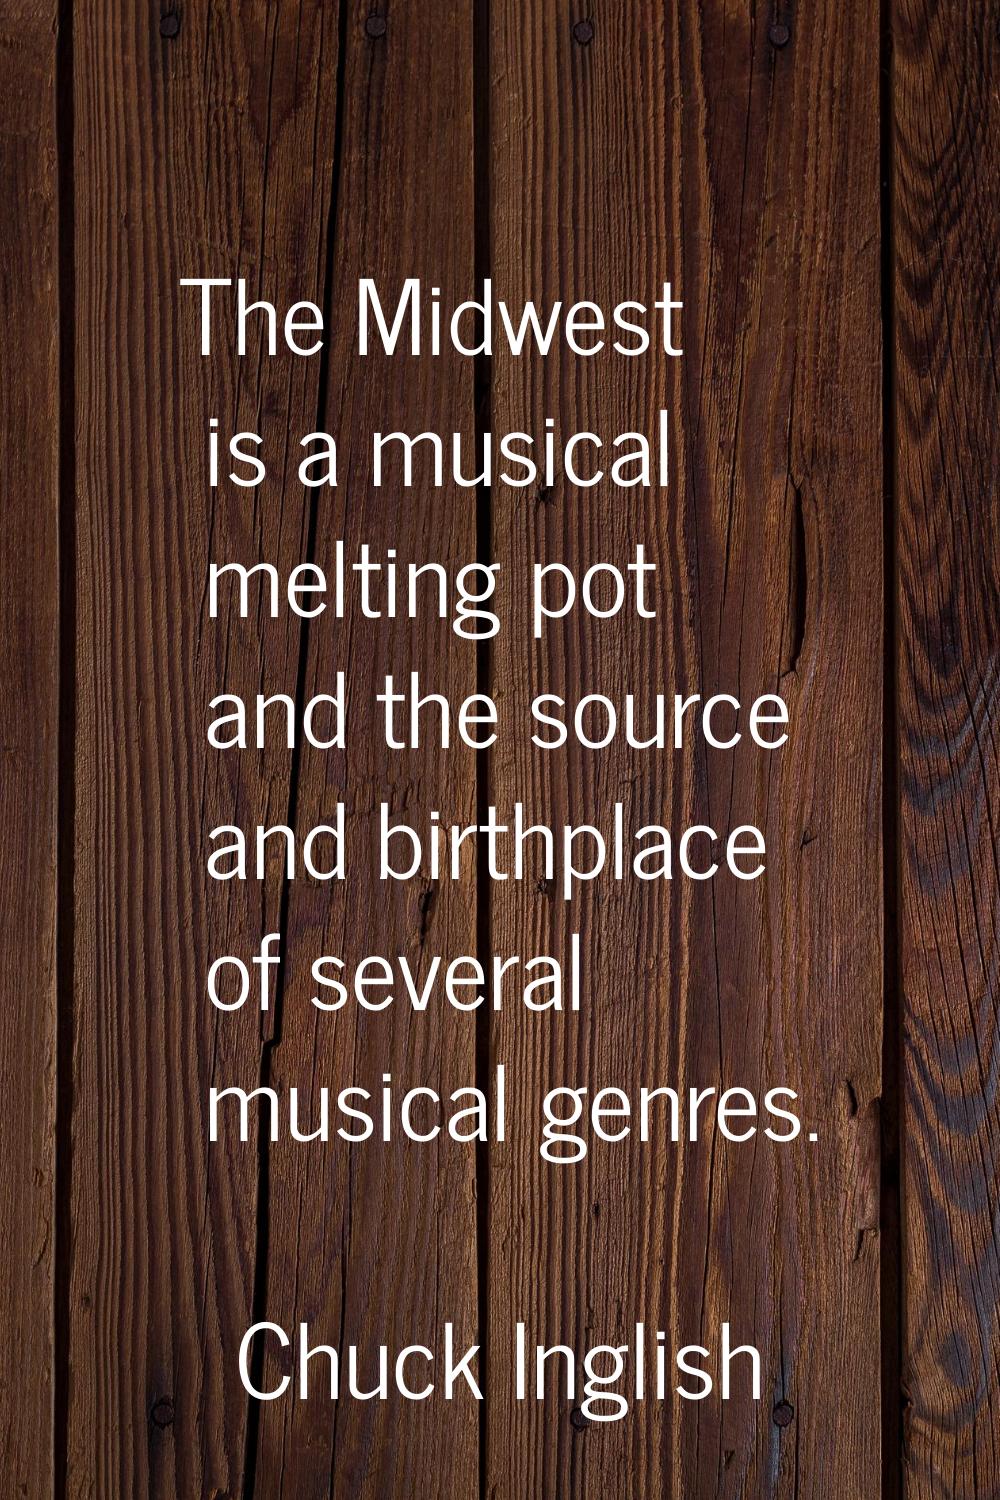 The Midwest is a musical melting pot and the source and birthplace of several musical genres.